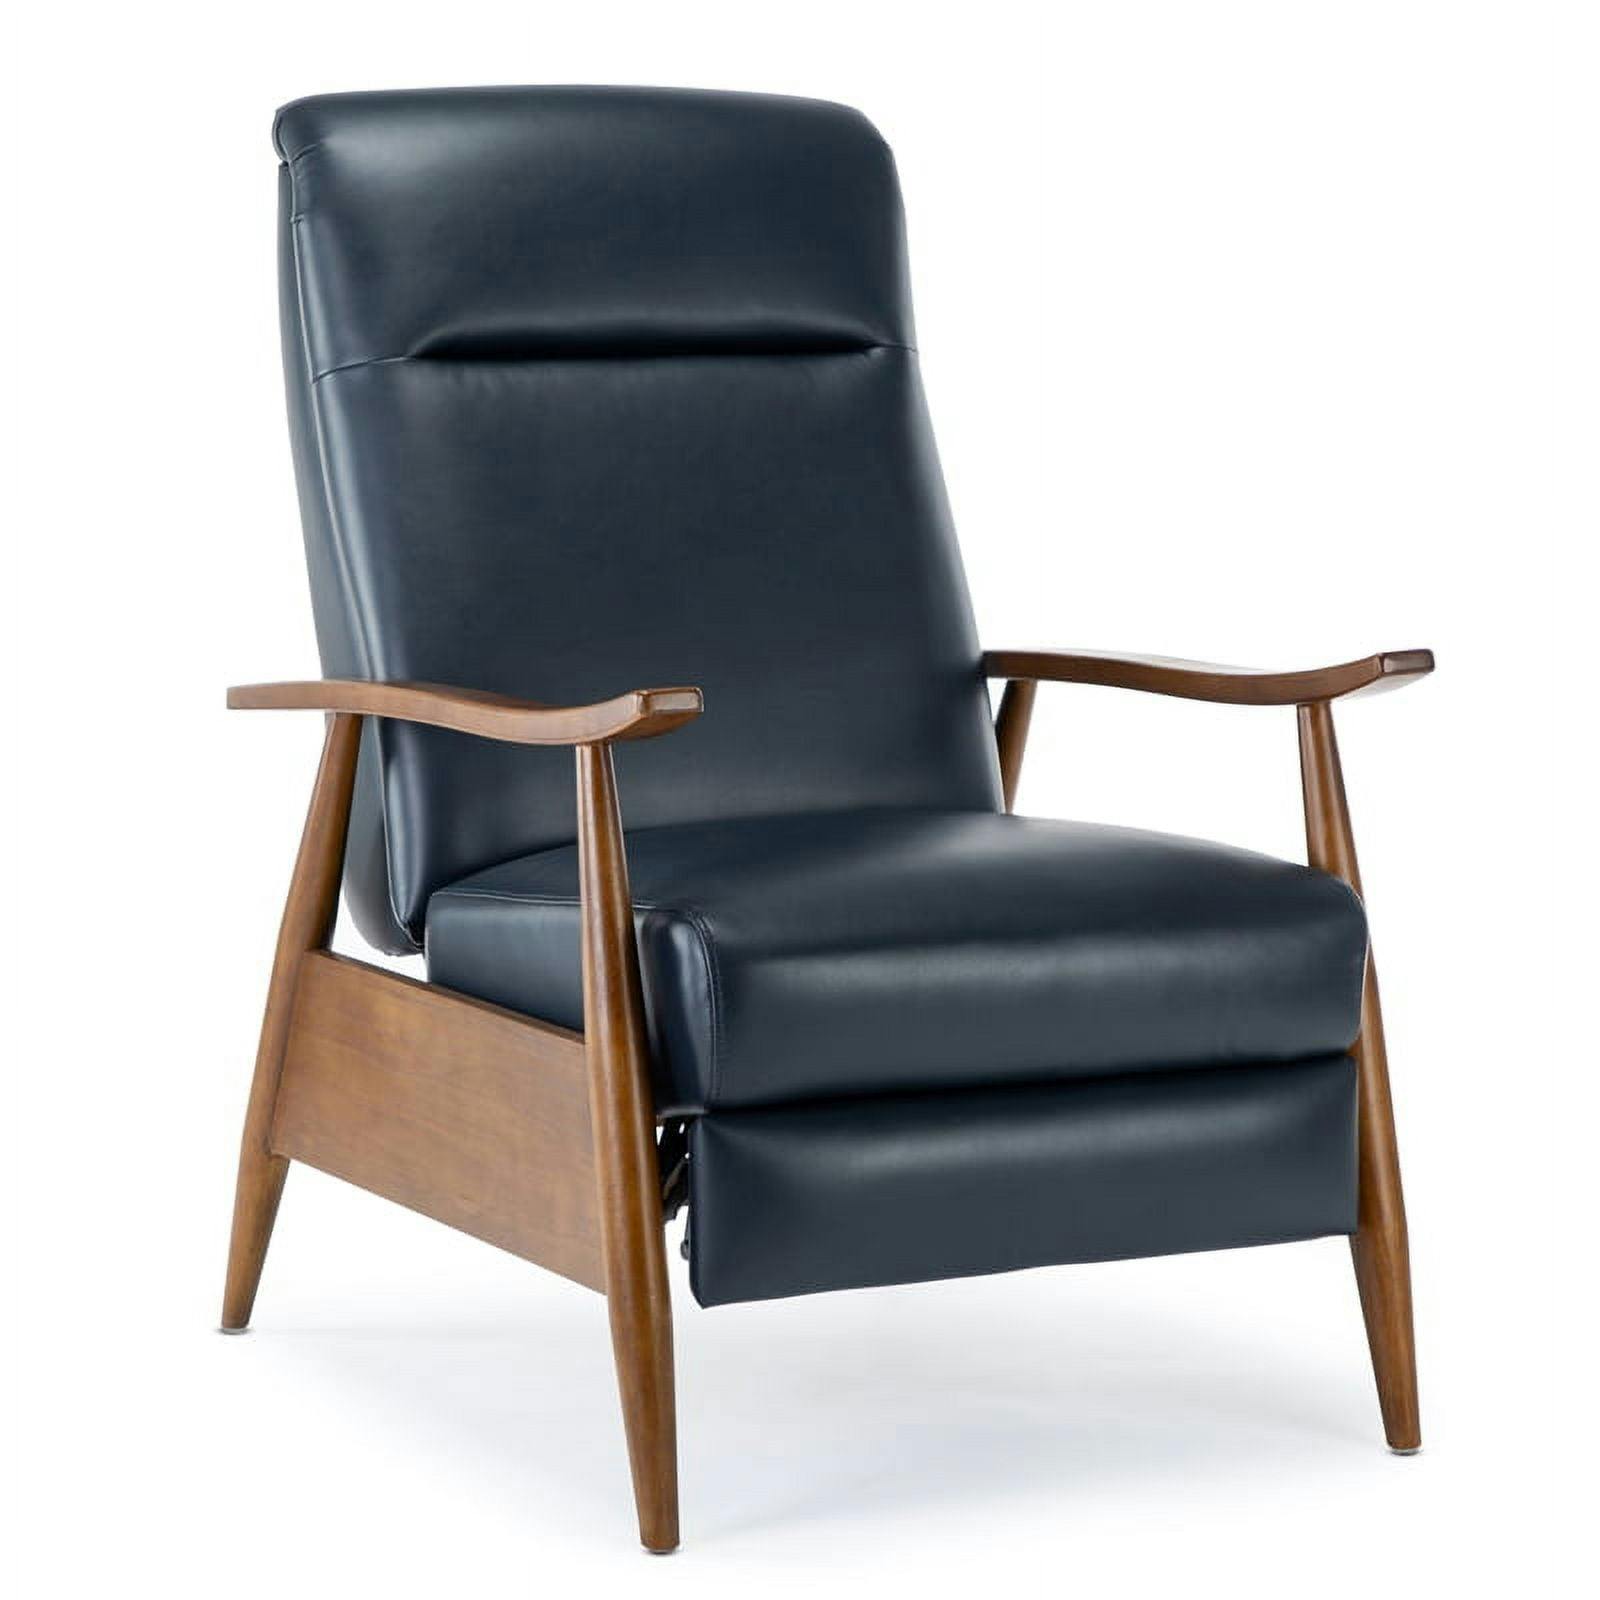 Midnight Blue Faux Leather Wood-Armed Recliner Chair